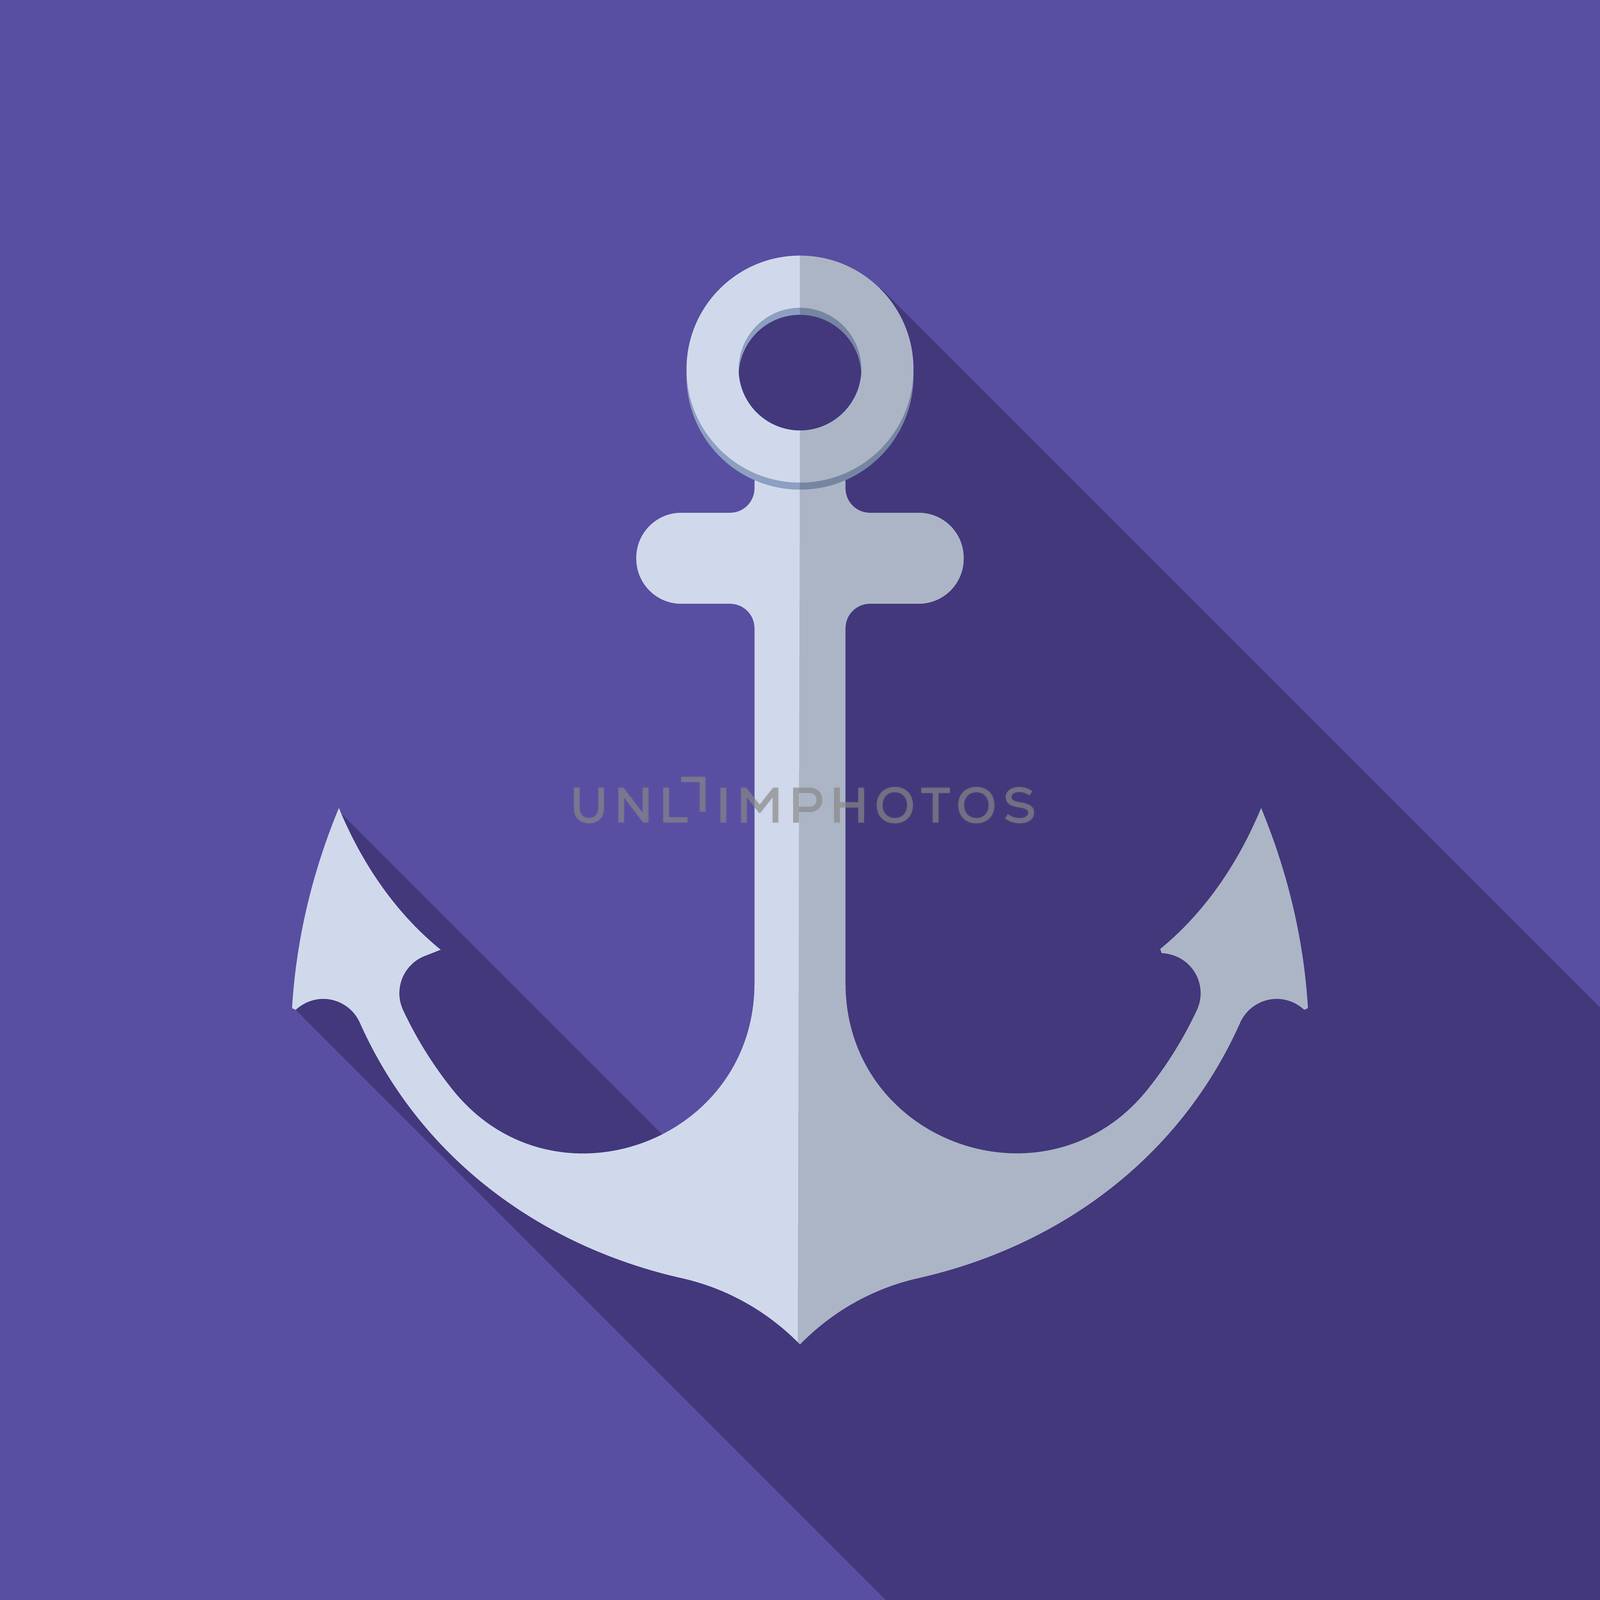 Flat design modern vector illustration of anchor icon with long shadow by Lemon_workshop